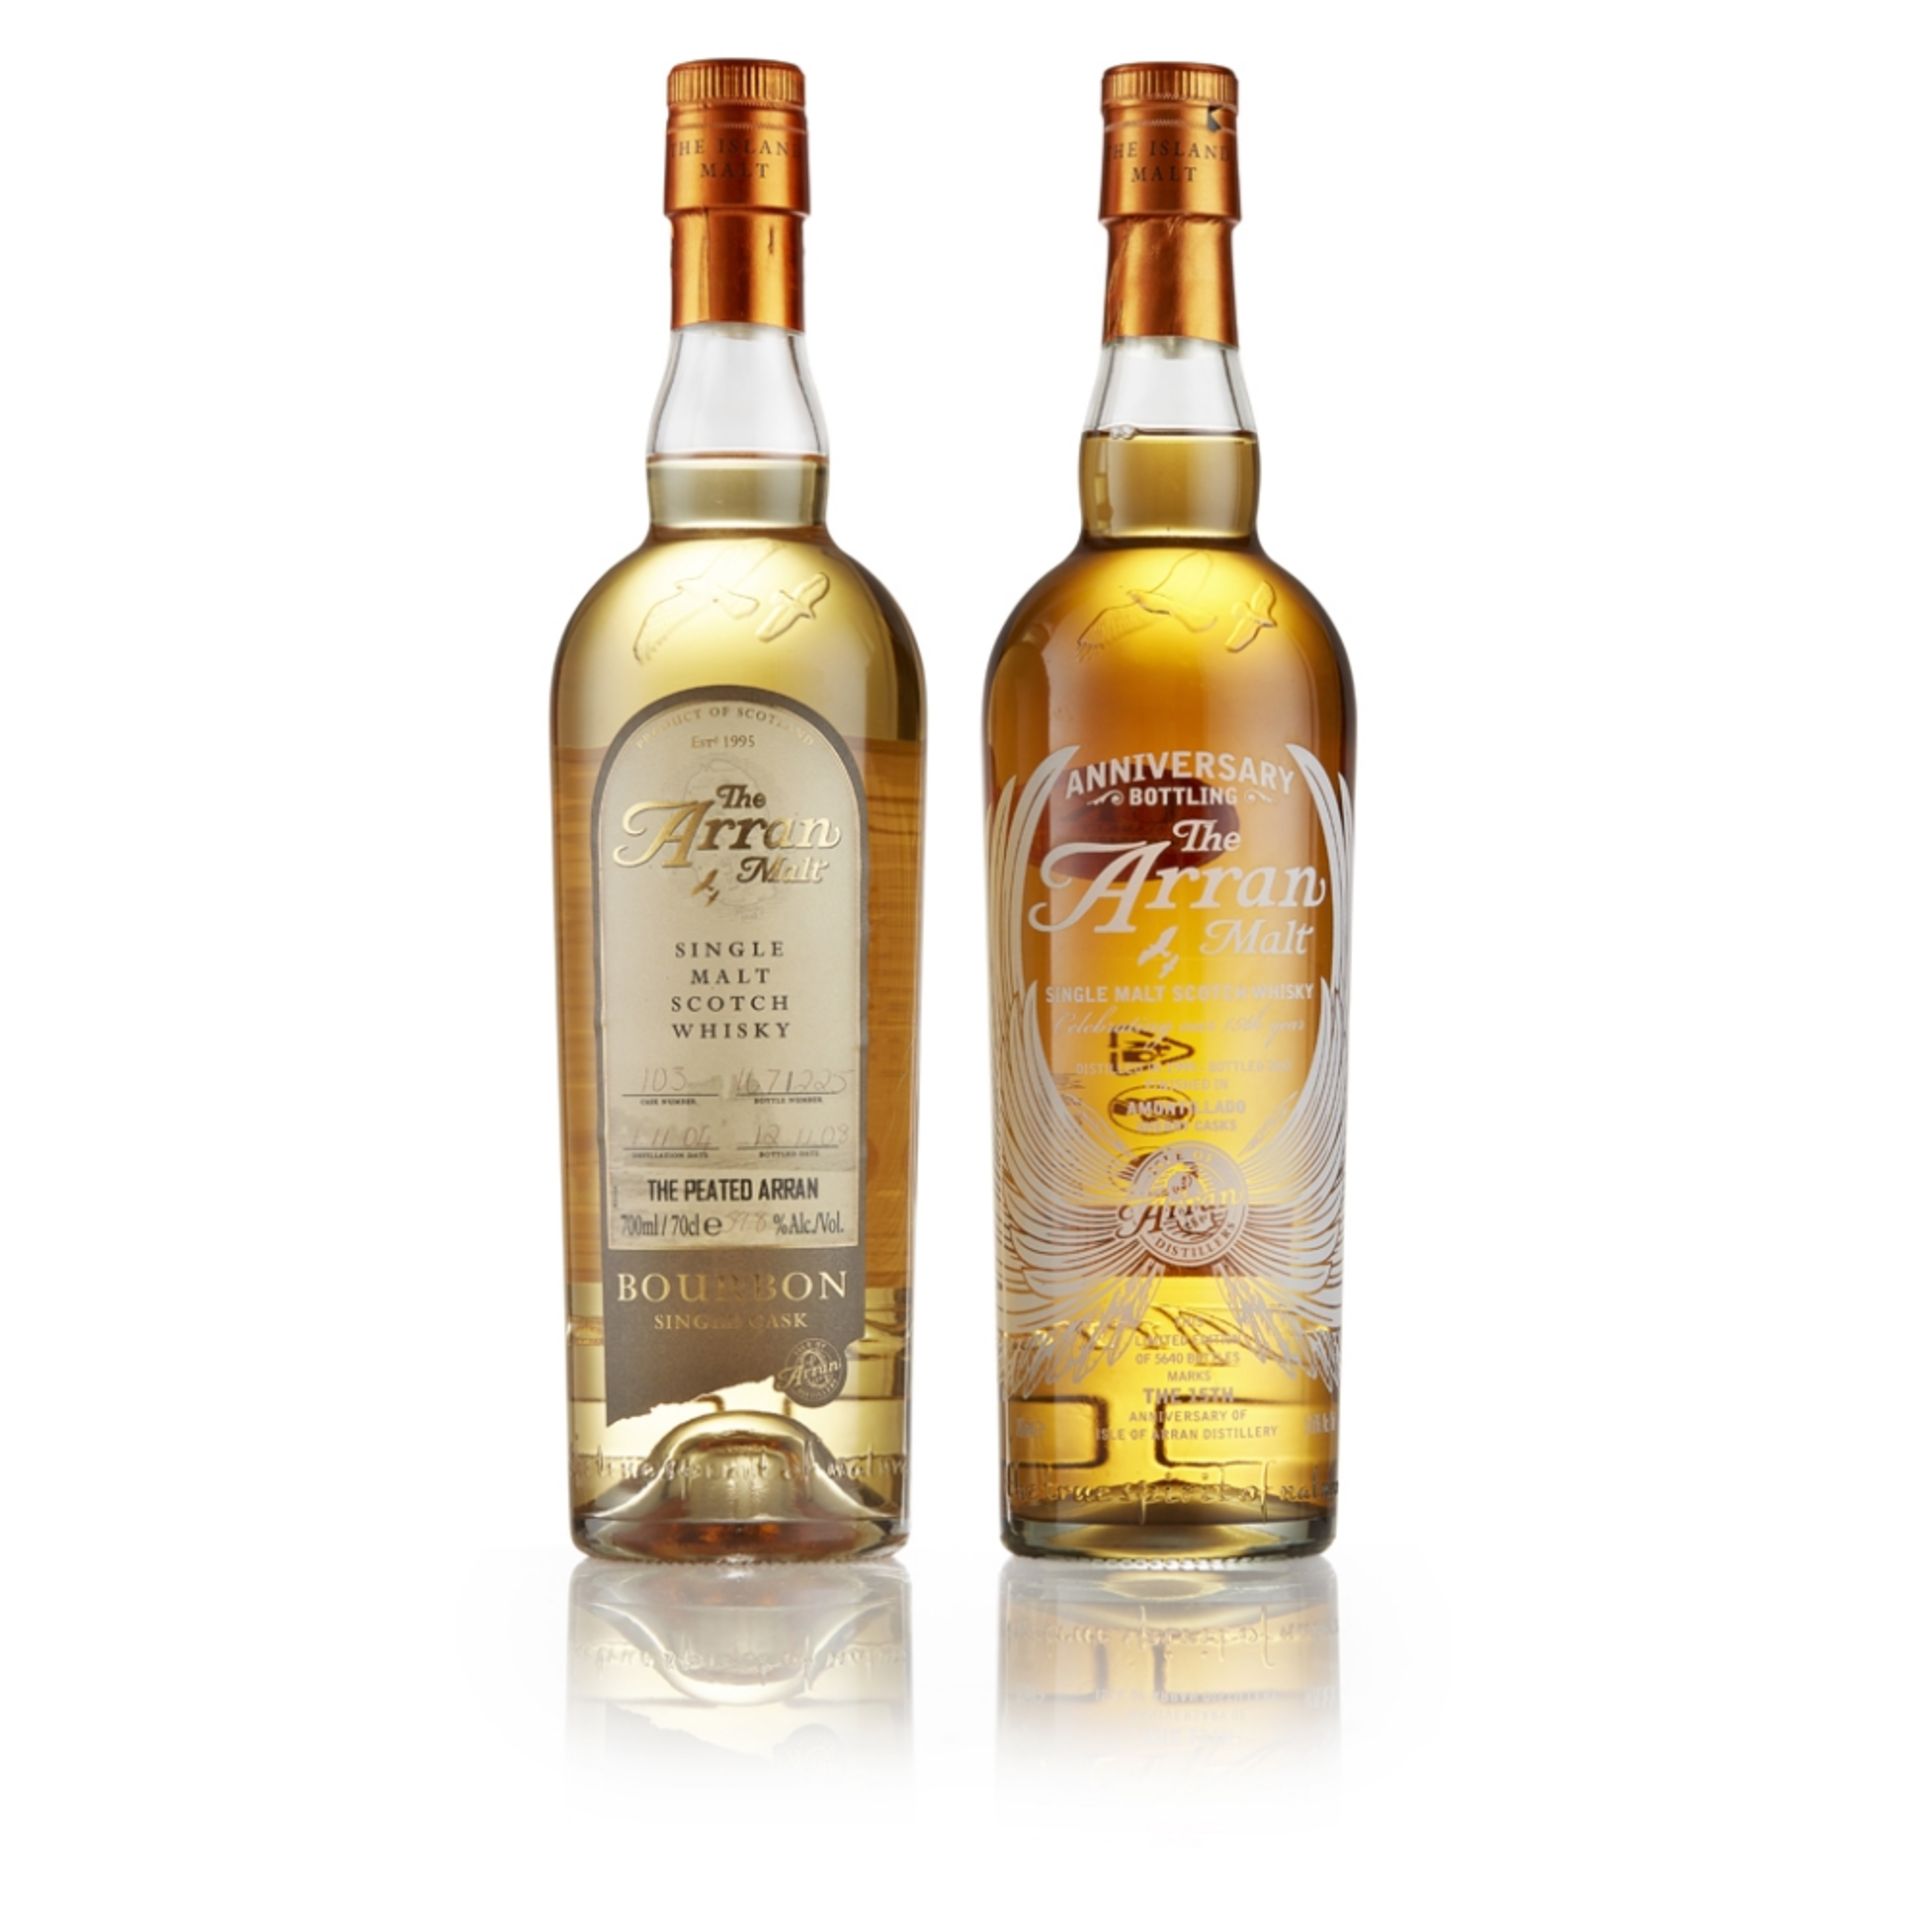 THE ISLE OF ARRAN 15TH ANNIVERSARY BOTTLING distilled in 1999, bottled in 2010, finished in